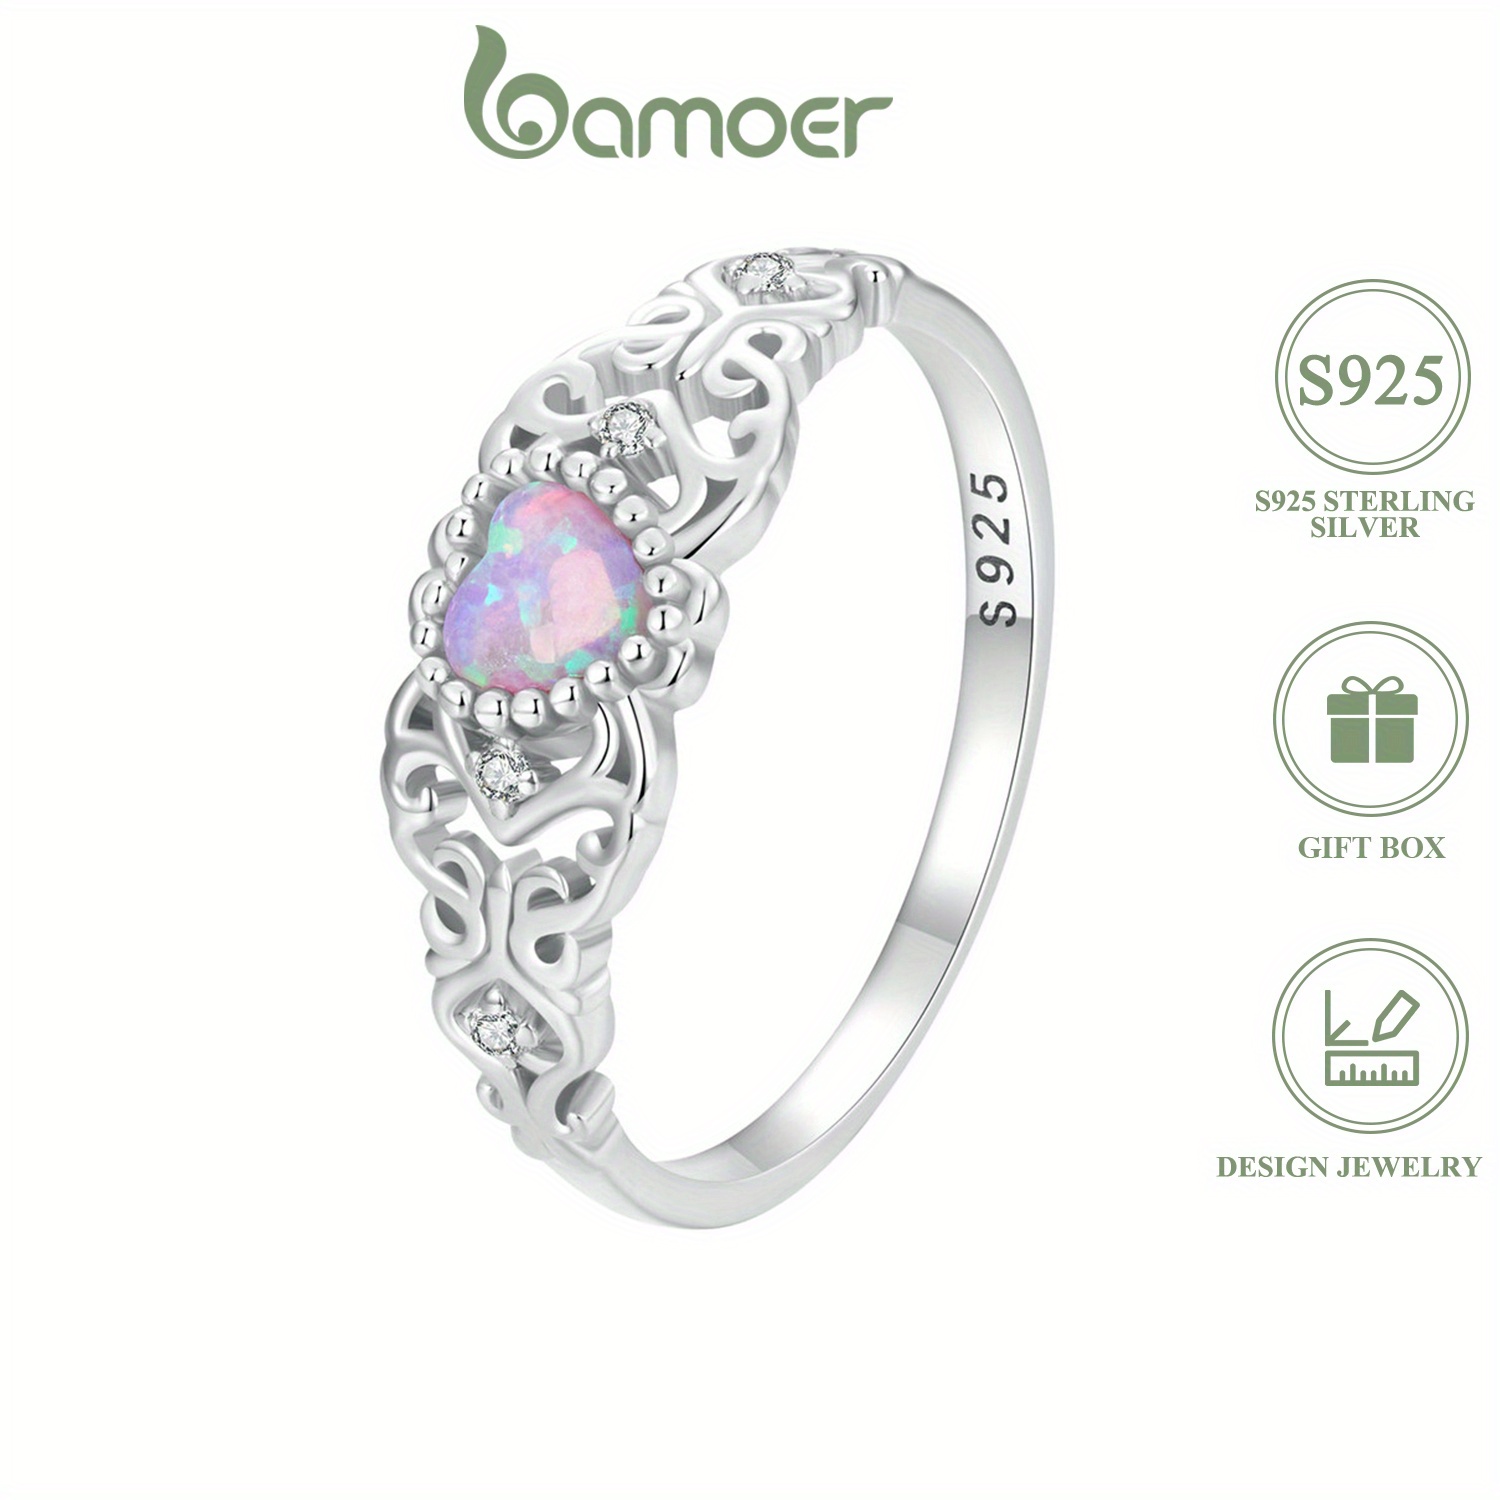 

1pc 925 Sterling Silver Ring Inlaid Opal In Heart Shape Retro Flower Carving On The Band Match Daily Outfits Party Accessory High Quality Jewelry With Gift Box